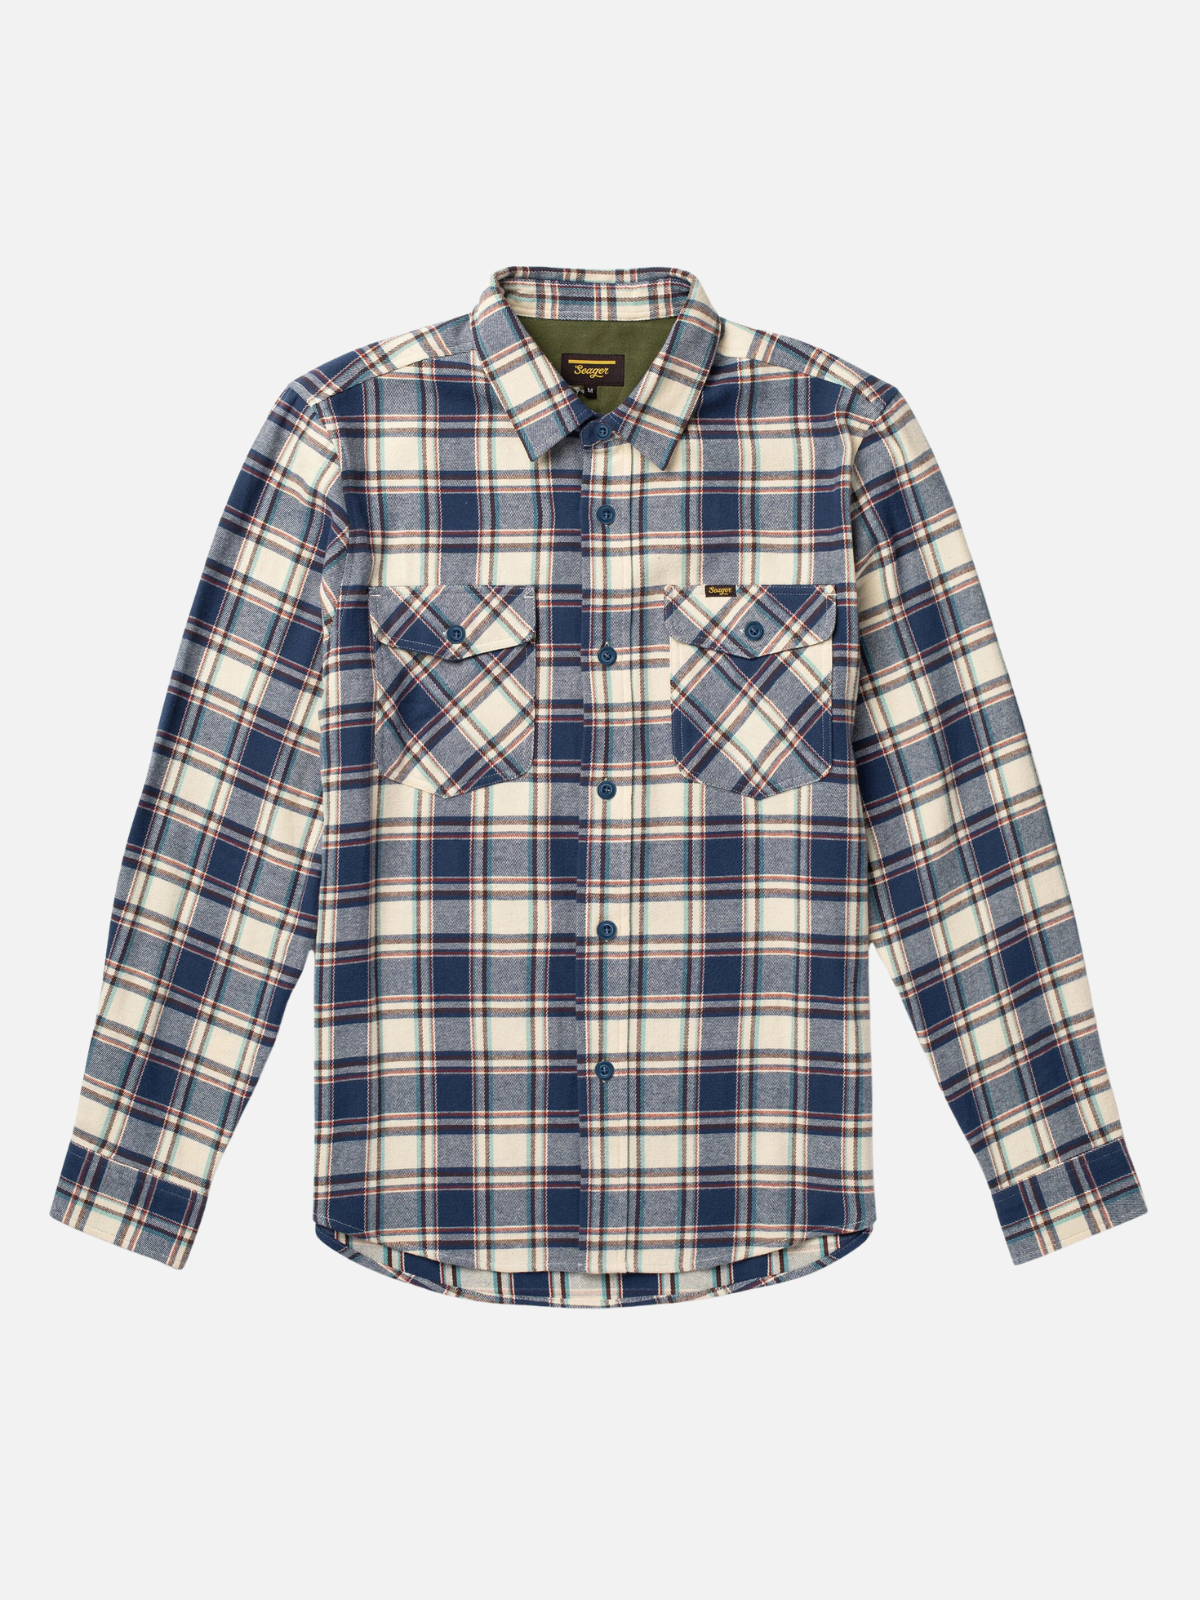 Seager Flannel Natural Blue Double Breast Pocket Kempt Athens GA Mens Clothing Store Downtown Athens Shopping University Of Georgia